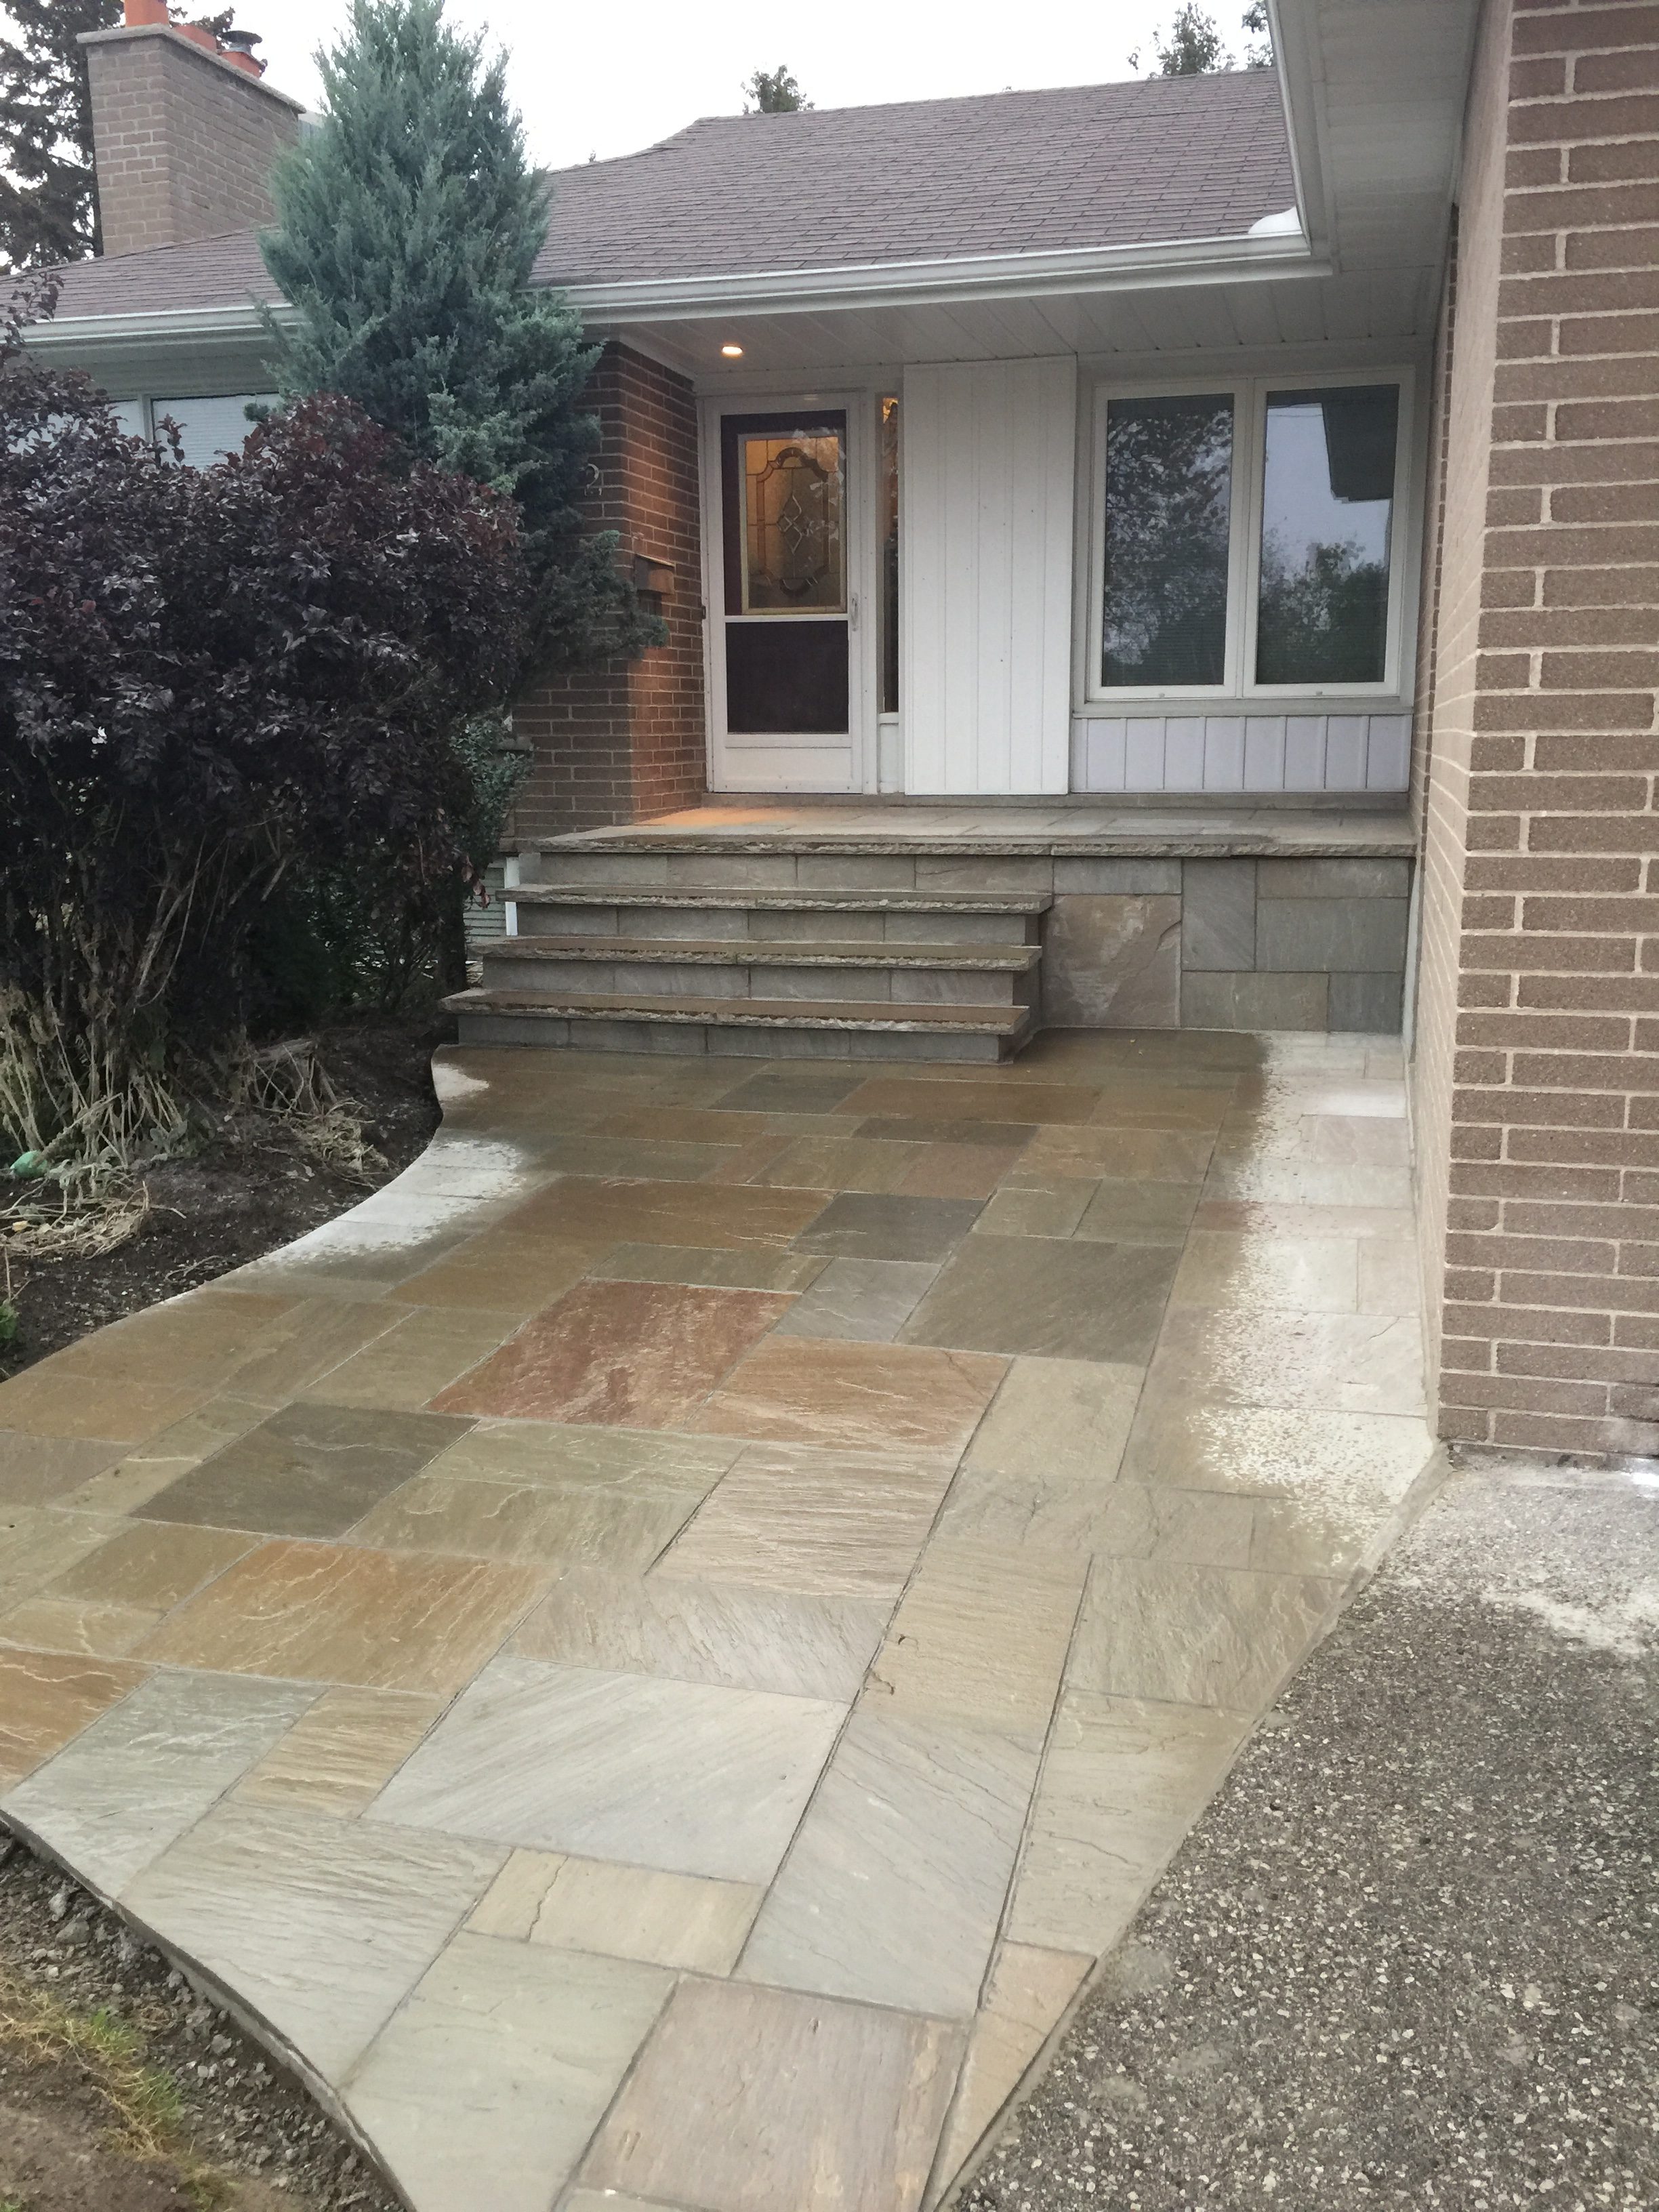 New Stone Entrance Way and Stone Stairs and Porch Installed